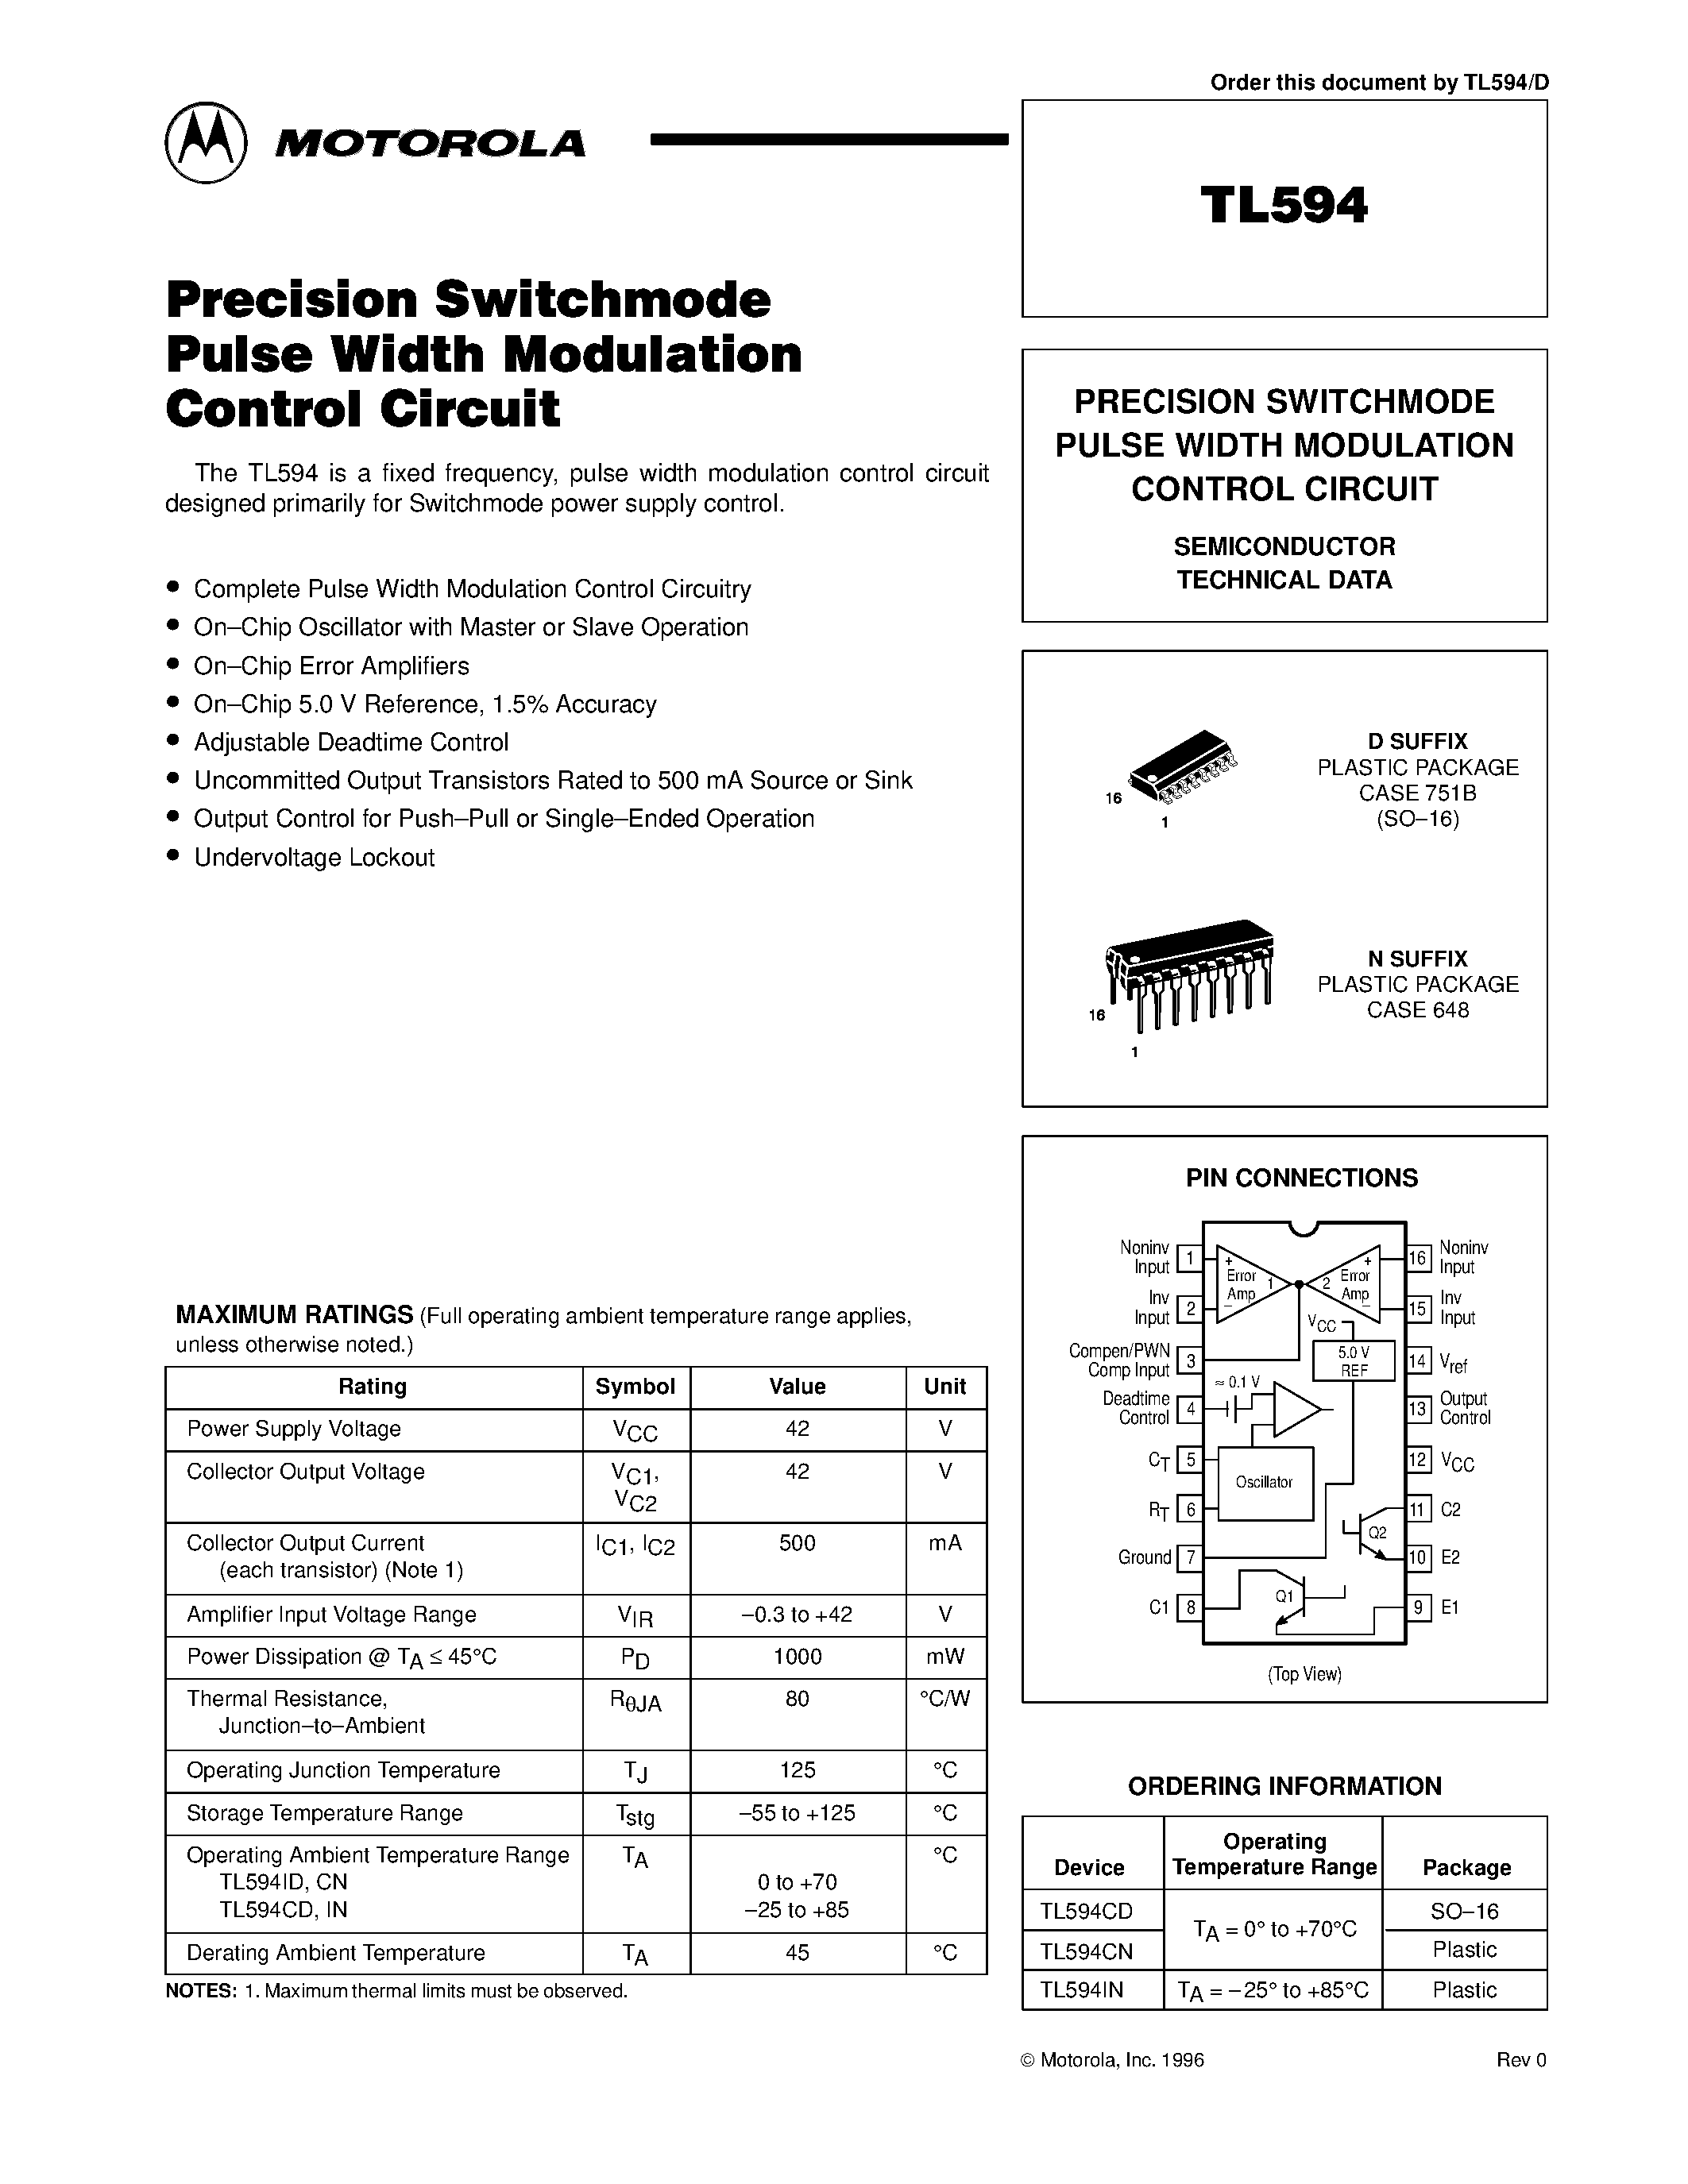 Datasheet TL594IN - PRECISION SWITCHMODE PULSE WIDTH MODULATION CONTROL CIRCUIT page 1